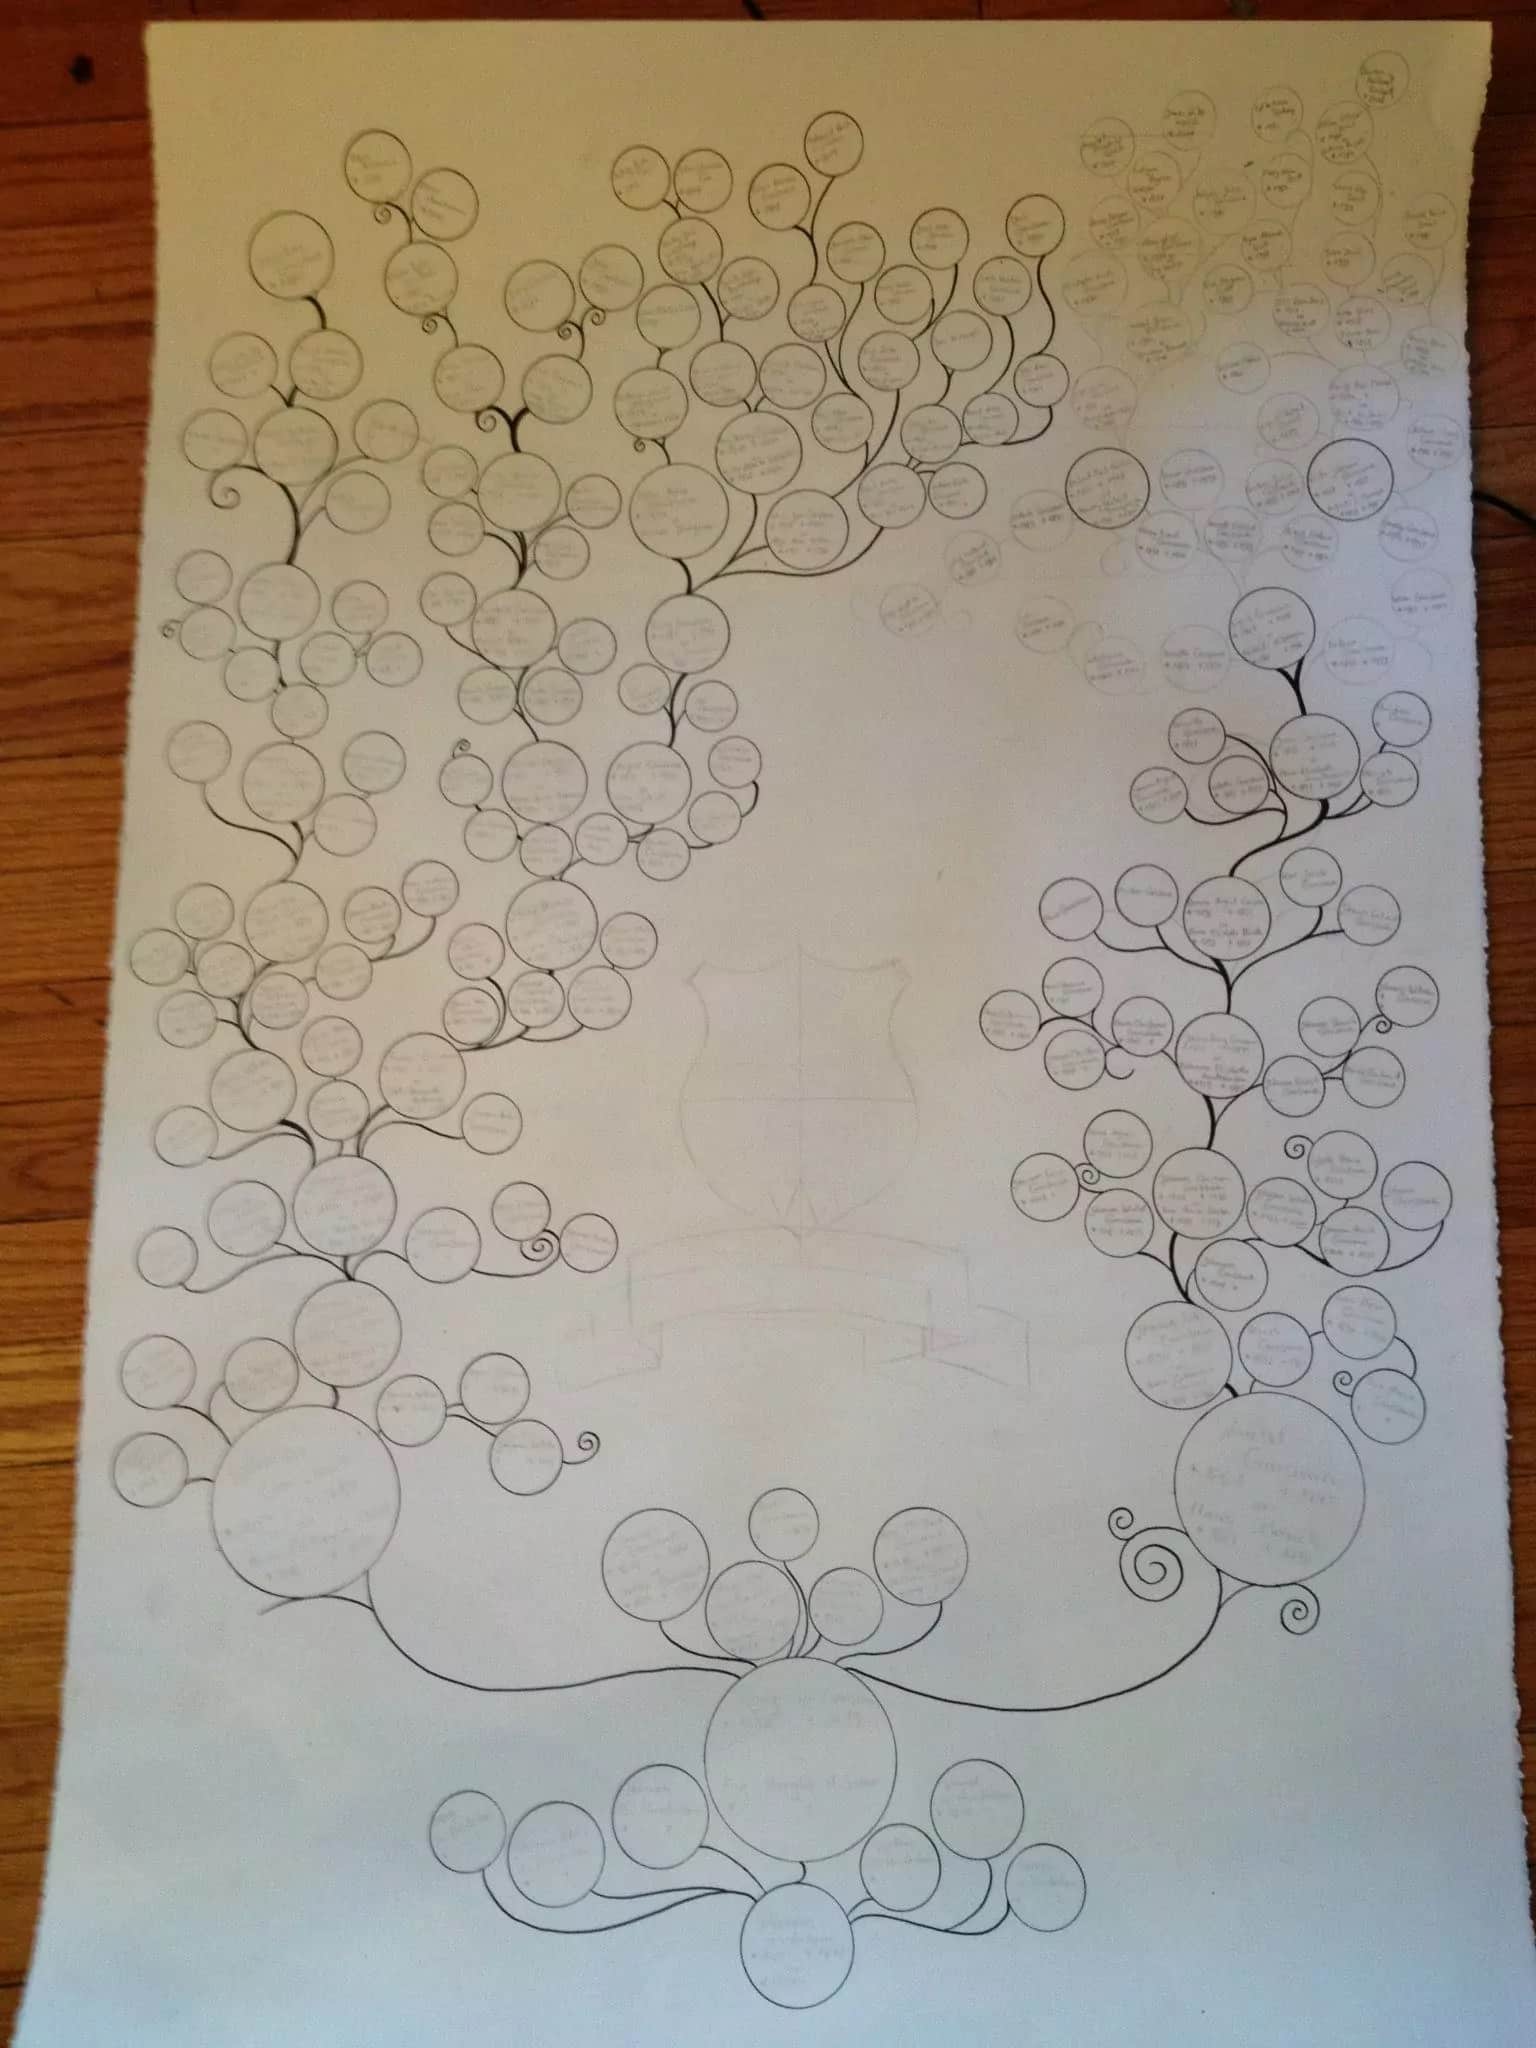 Hand-drawn family tree chart for Helen